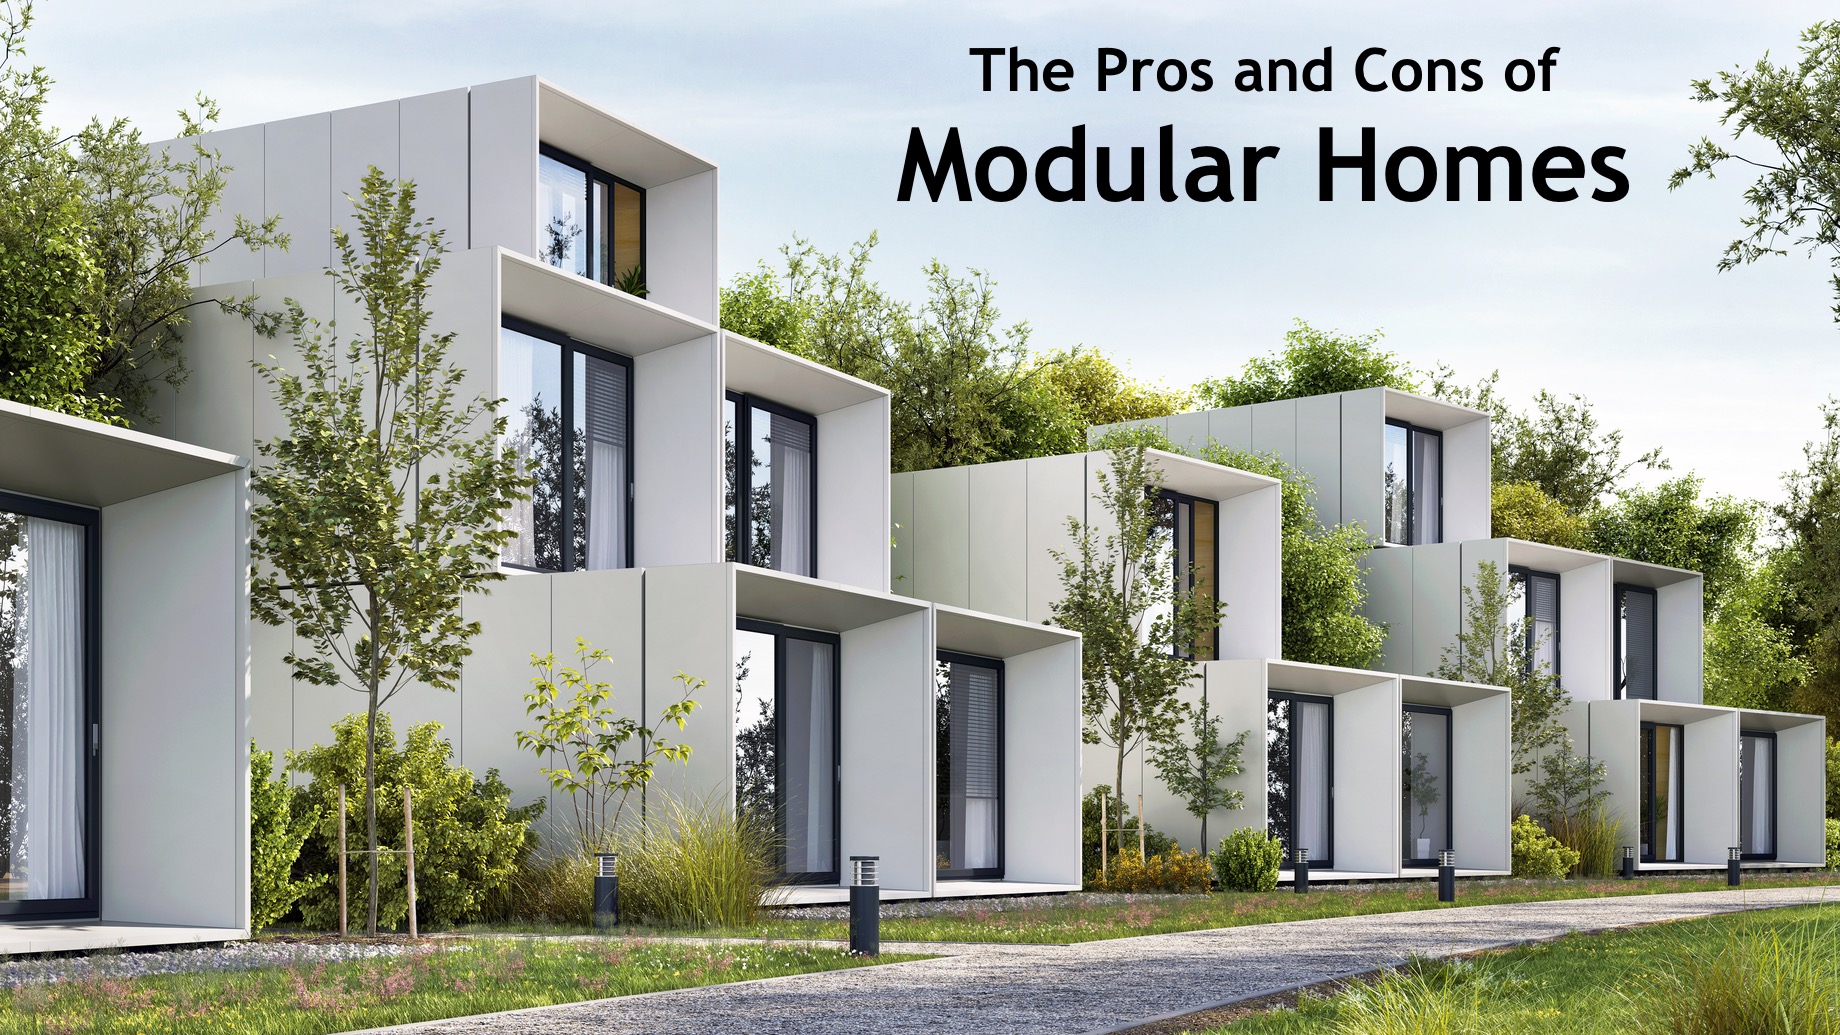 The Pros and Cons of Modular Homes